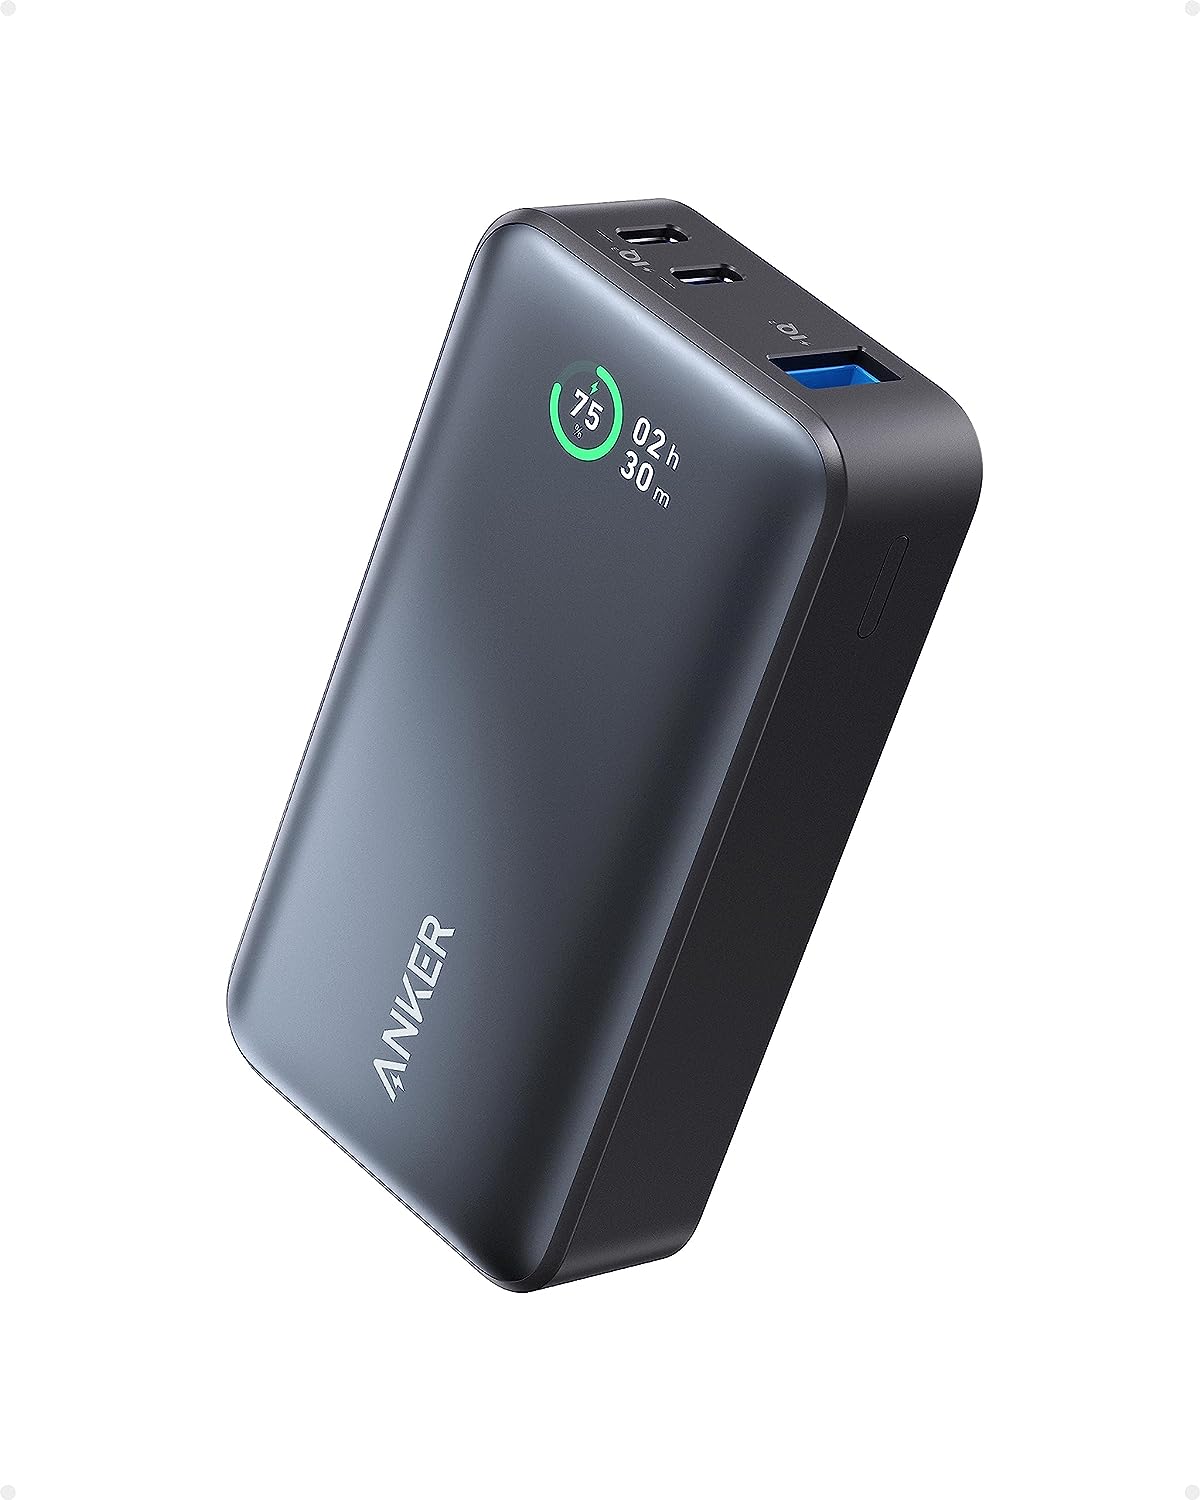 Anker 10,000 mah power bank with PowerIQ 3.0 - $29.99 with Prime